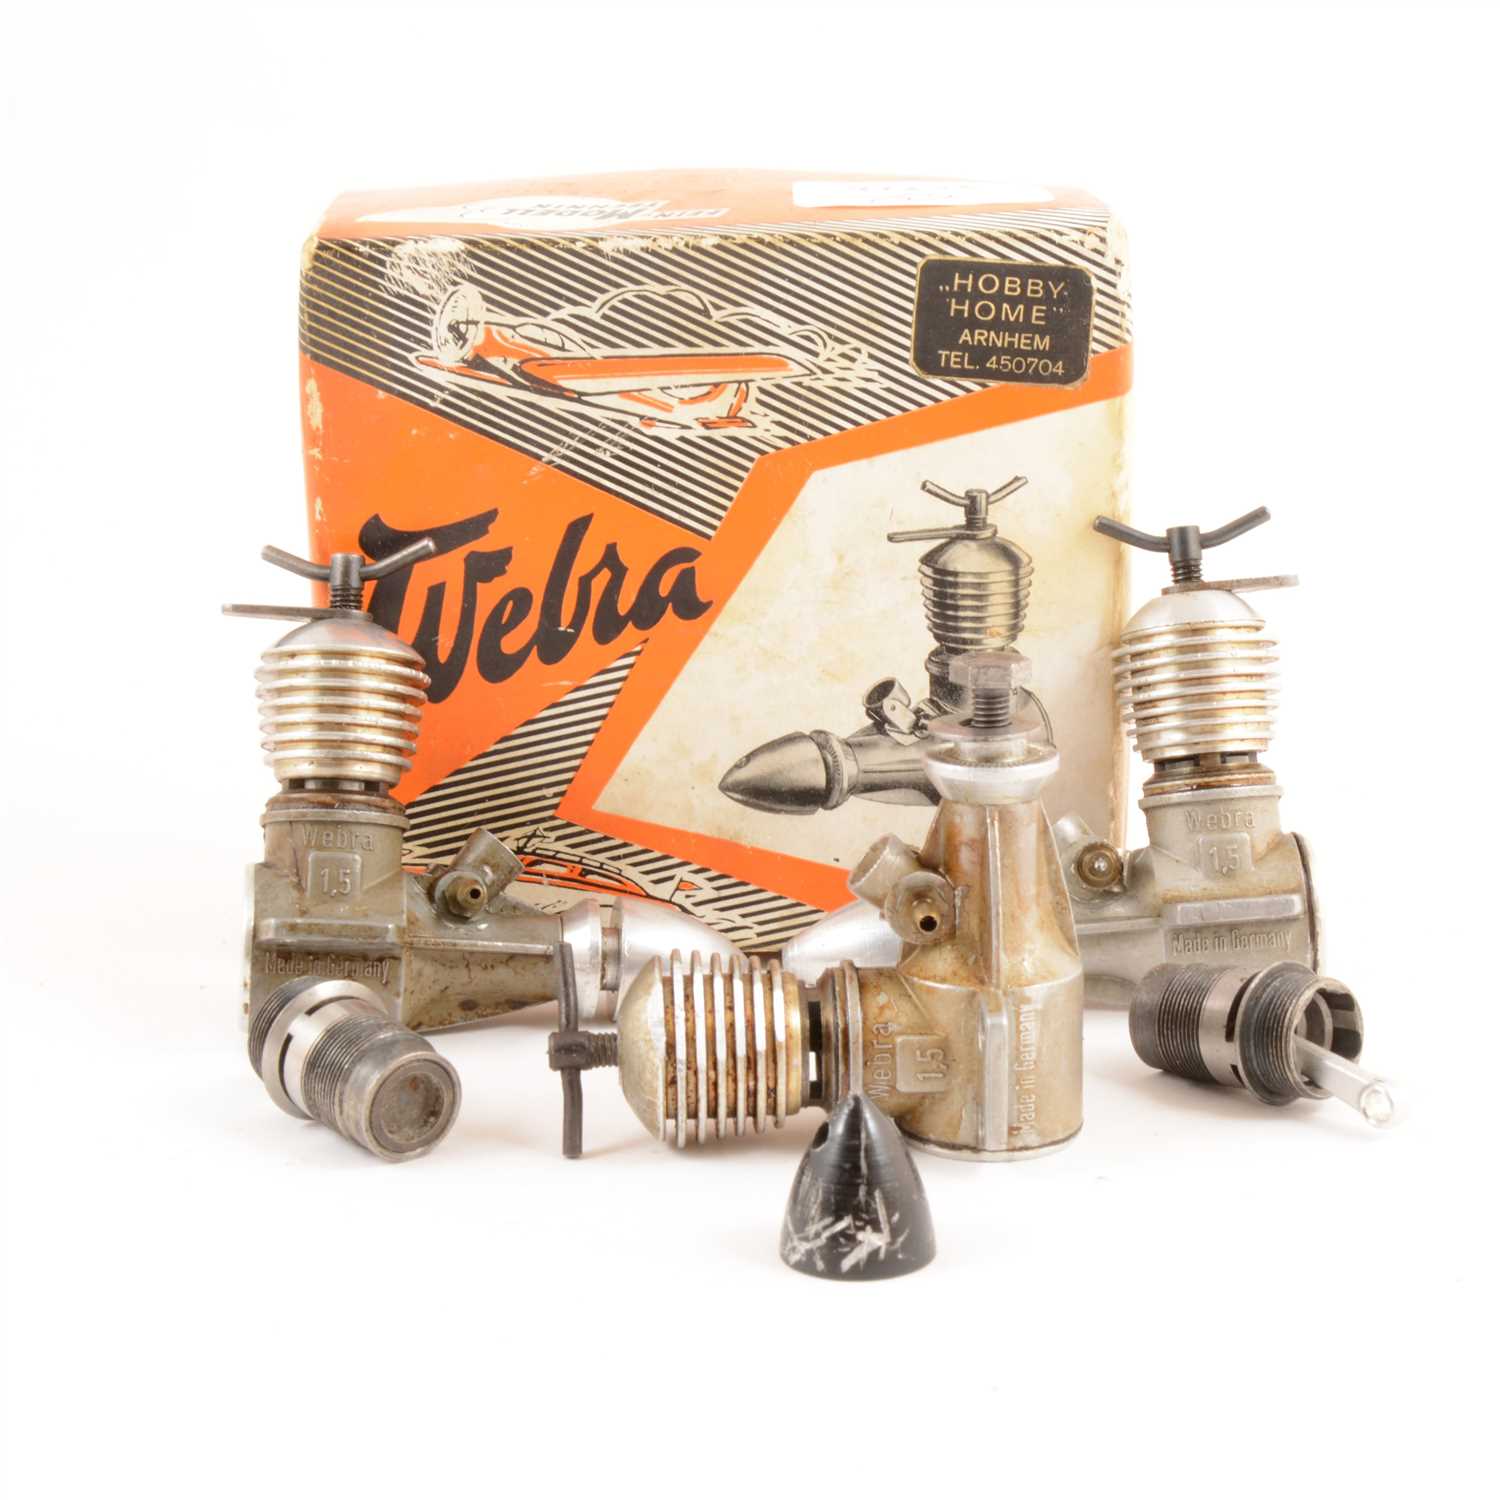 Lot 38 - 3 x Webra 1.5cc diesels with two spare piston liner assemblies, boxed.